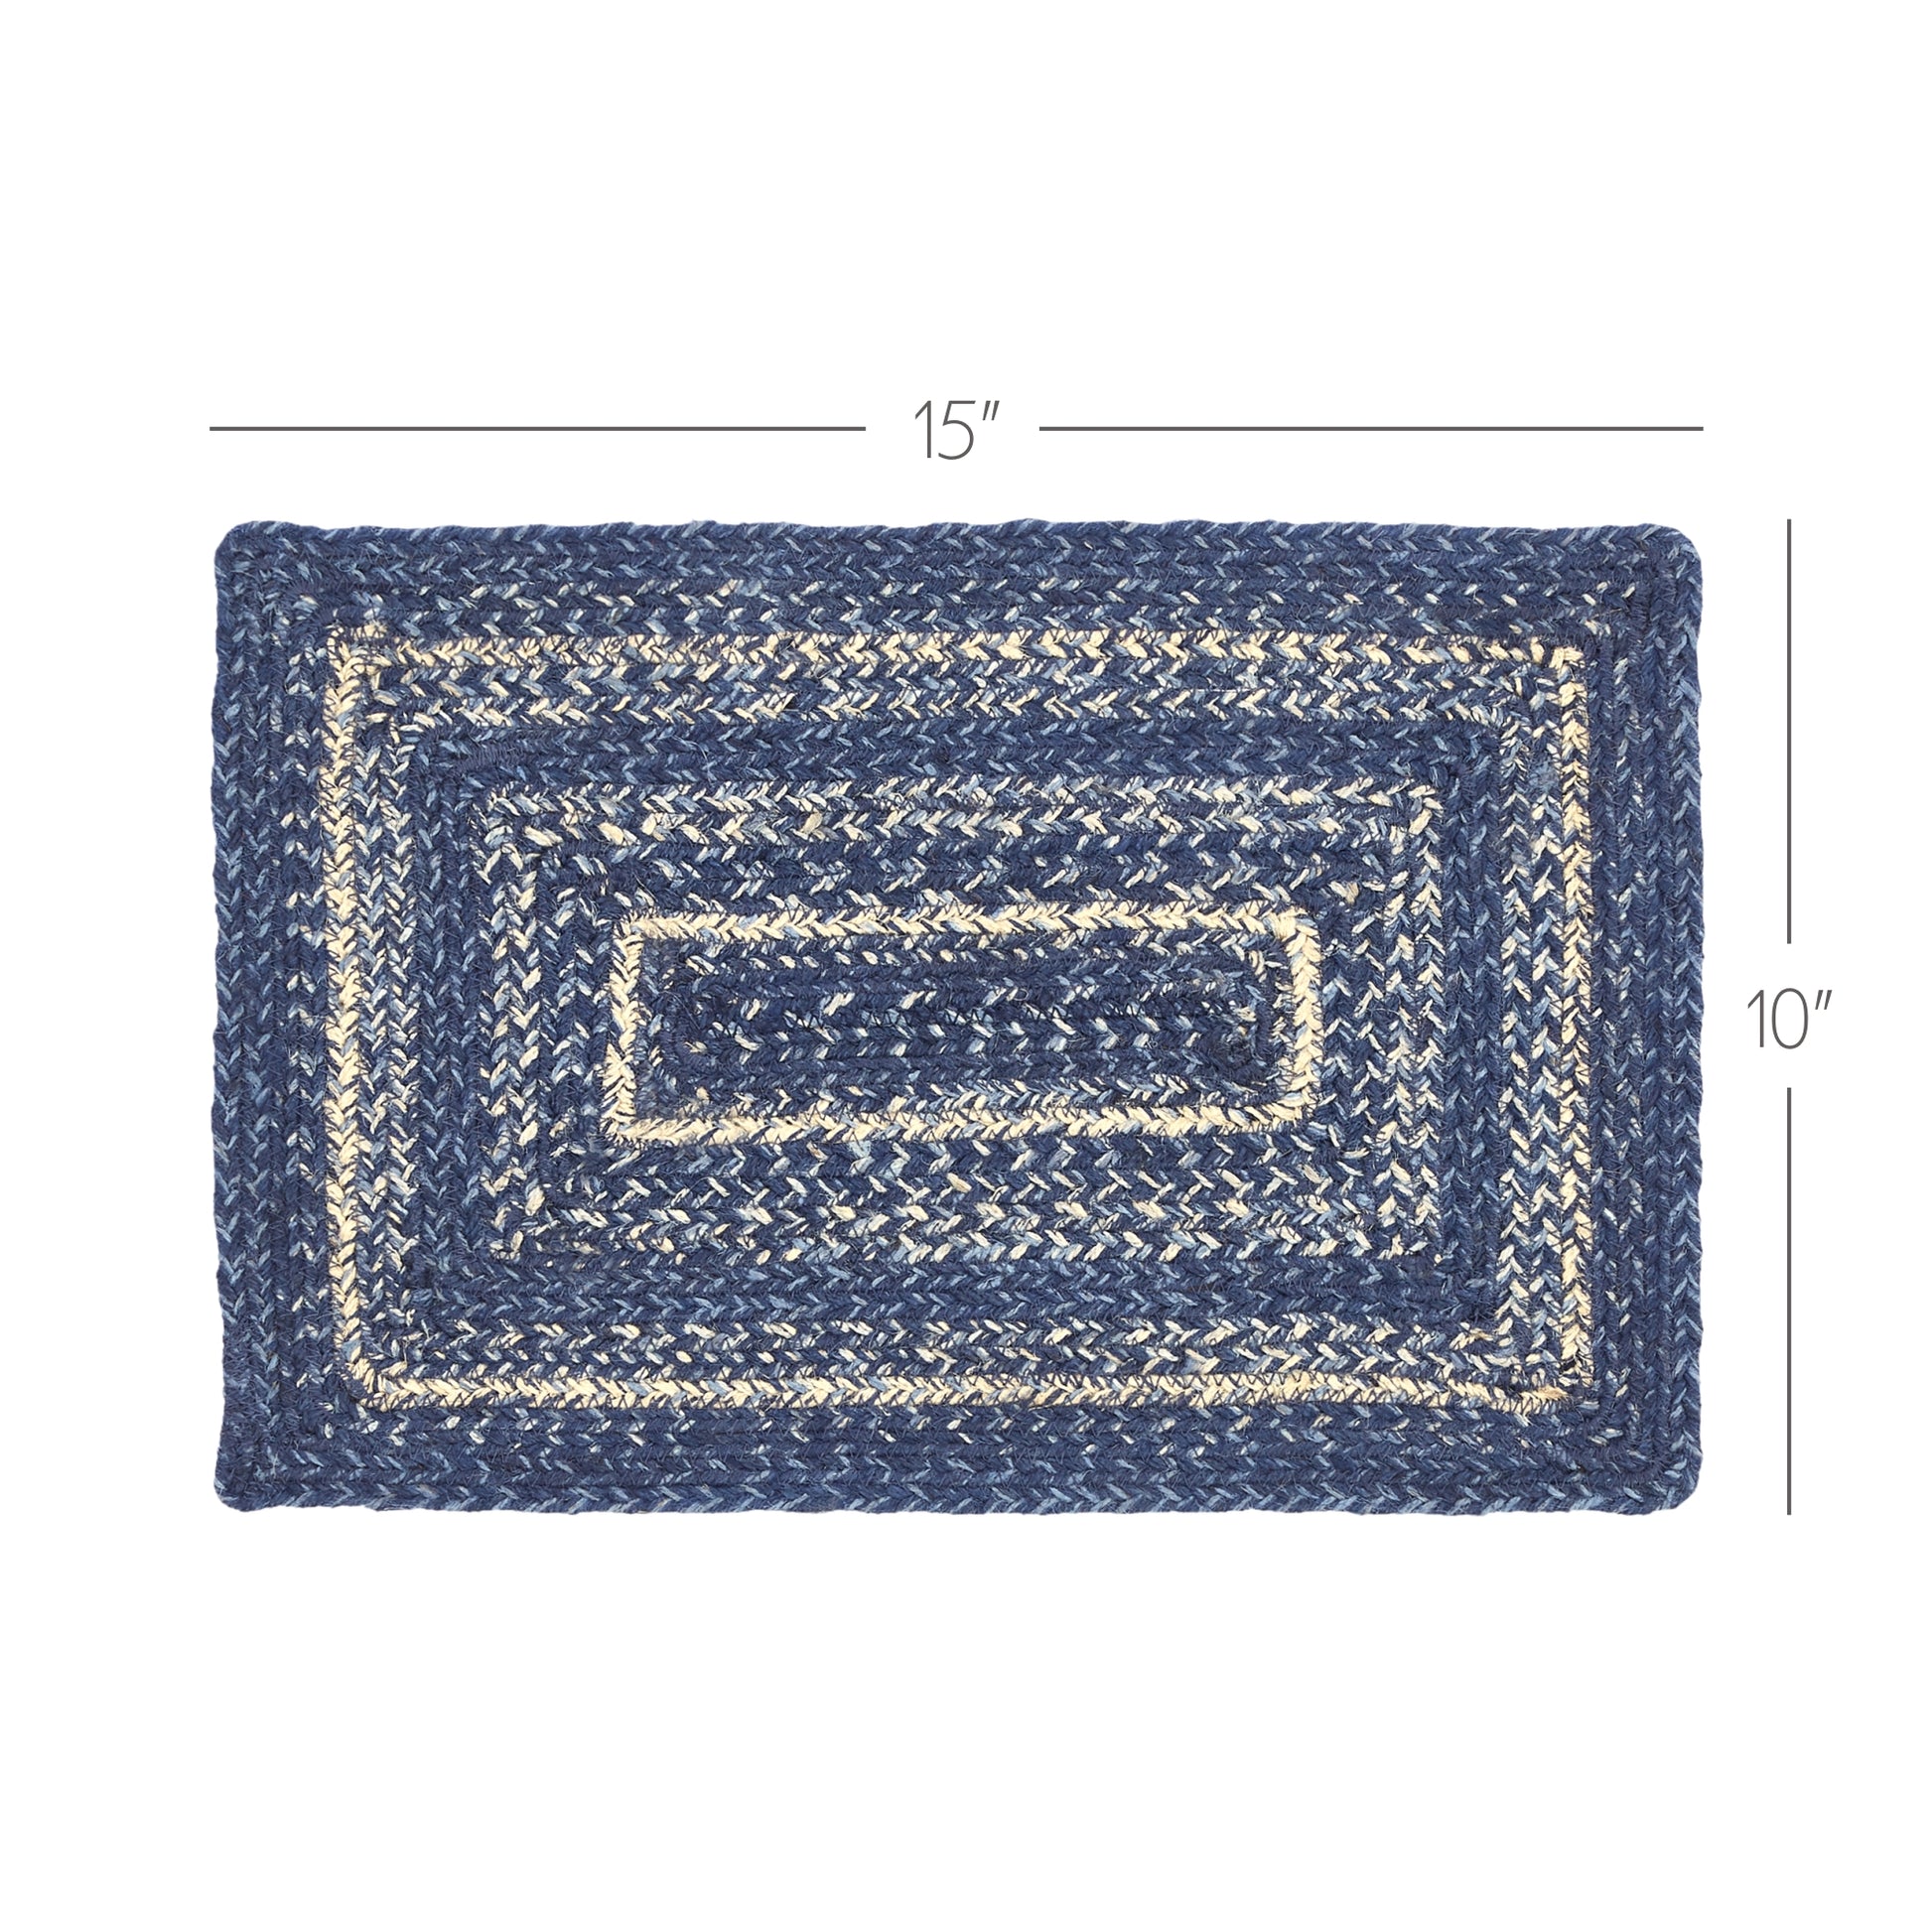 67101-Great-Falls-Blue-Jute-Rect-Placemat-10x15-image-3